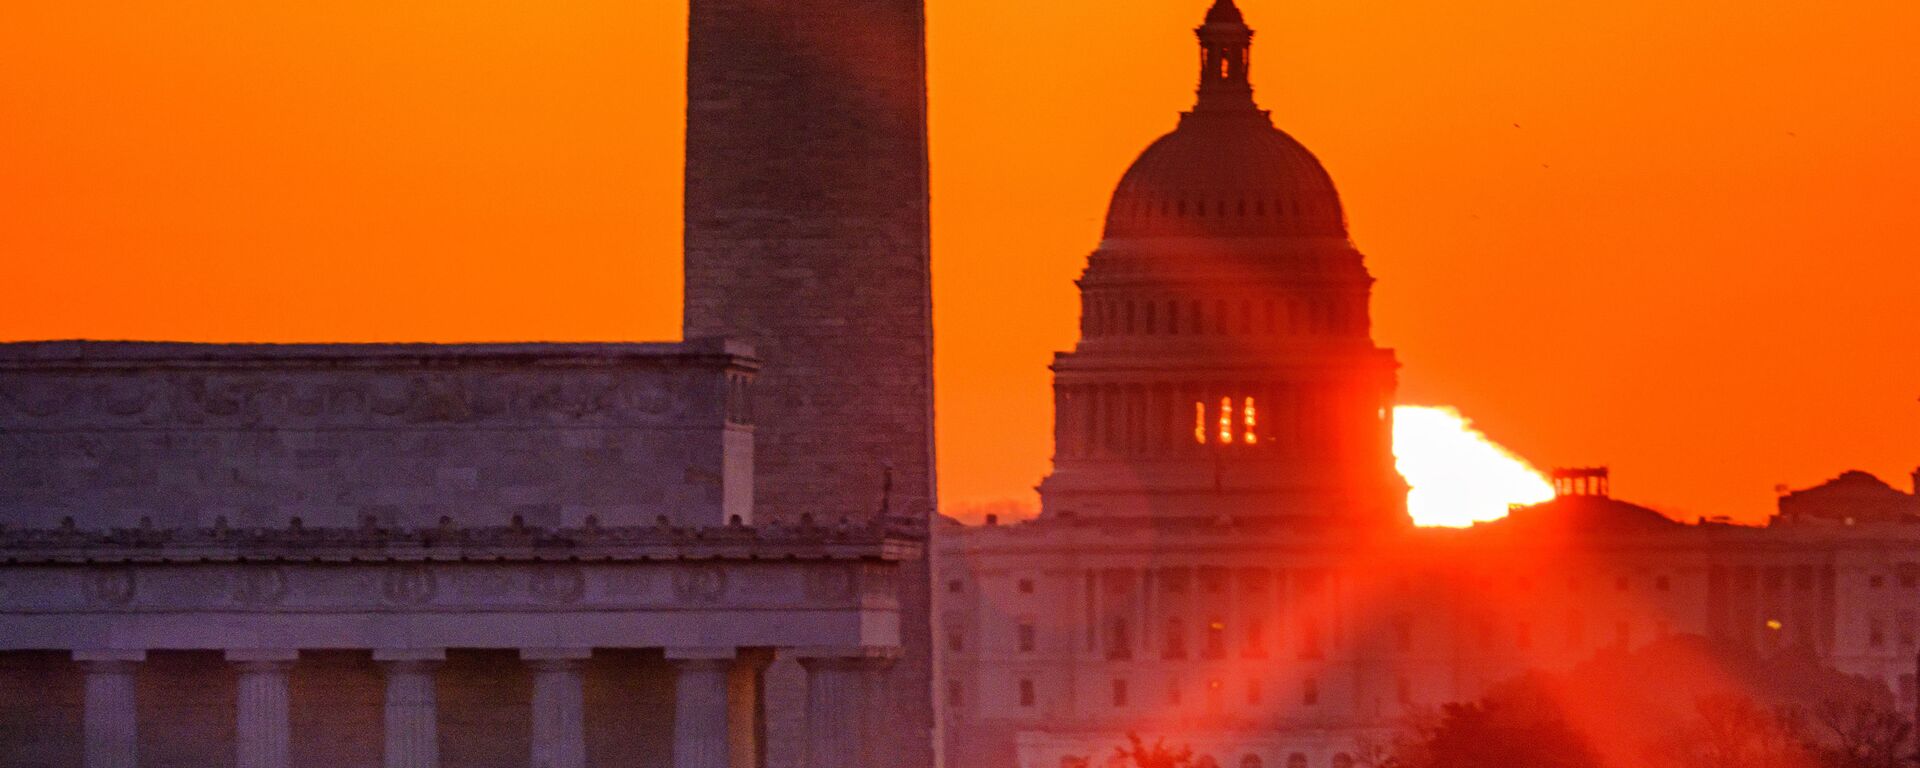 The sun flares through the camera lens as it rises behind the U.S. Capitol building, Washington Monument and the Lincoln Memorial, Monday, March 22, 2021, in Washington. - Sputnik International, 1920, 28.05.2021